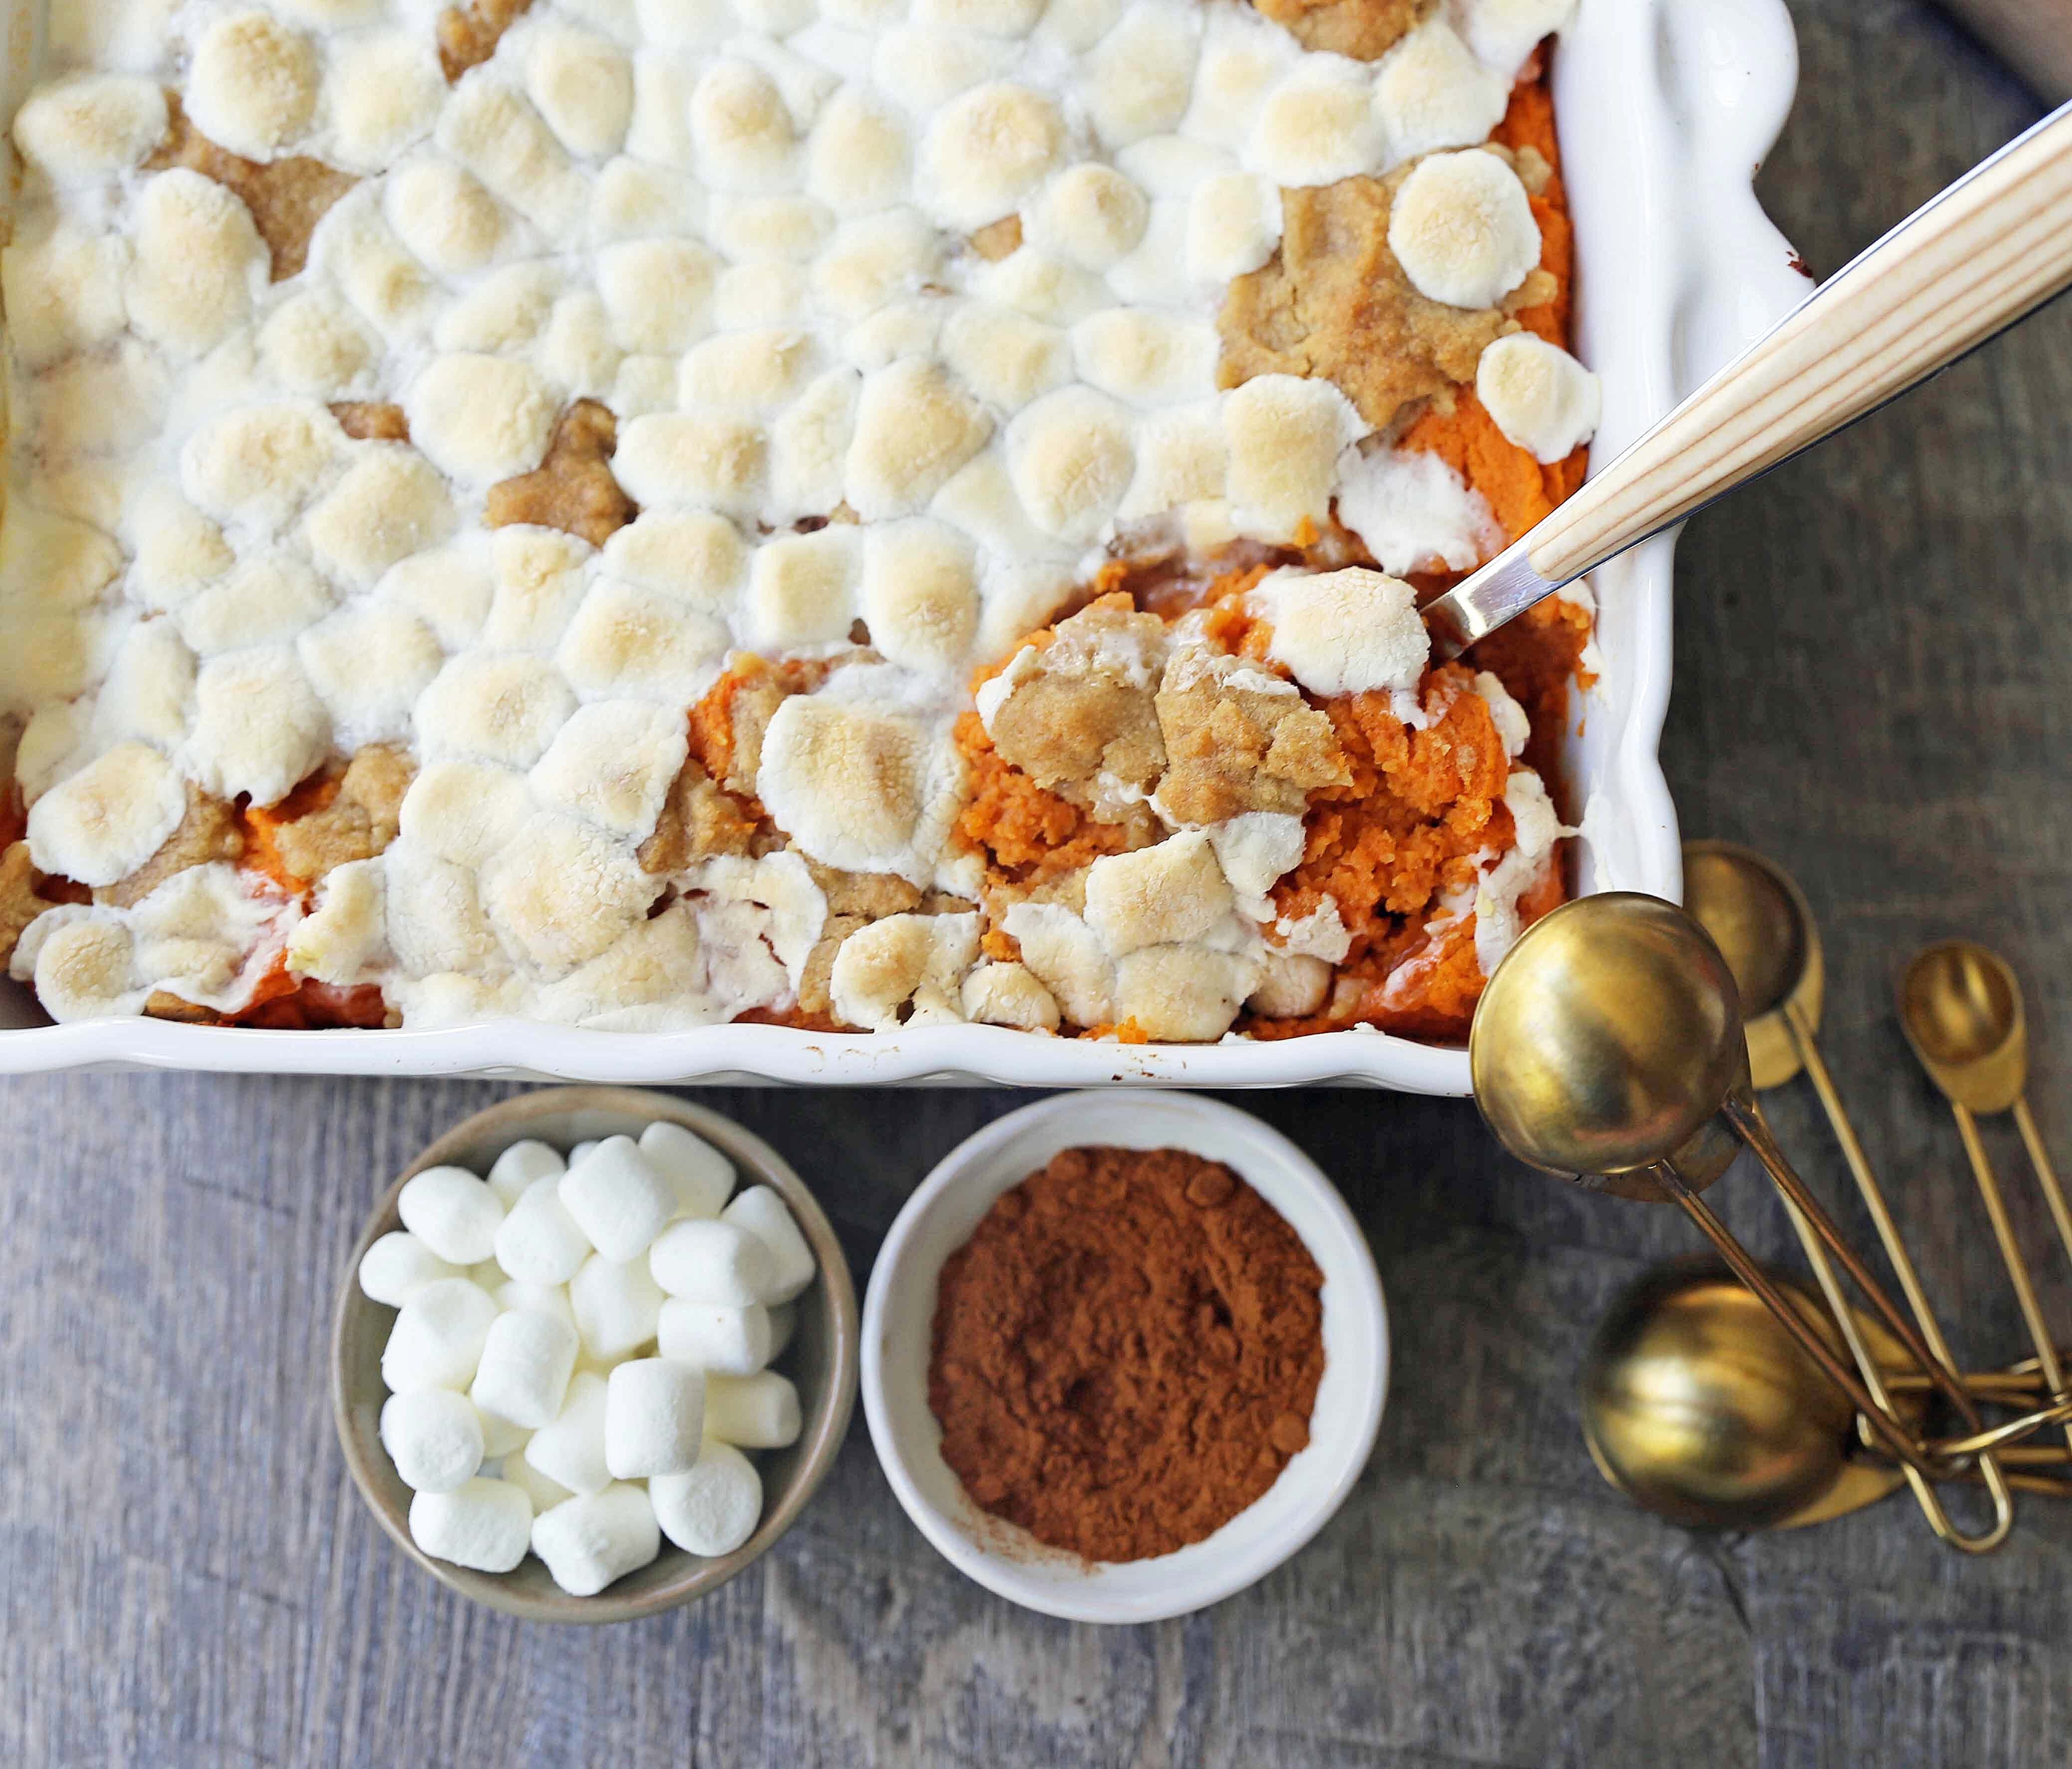 Sweet Potato Casserole with Marshmallows and Streusel. A classic Thanksgiving side dish with savory and creamy sweet potatoes topped with toasted marshmallows and brown sugar streusel. www,modernhoney.com #sweetpotatocasserole #sweetpotatoes #sweetpotatoeswithmarshmallows #thanksgiving #thanksgivingsidedish #sidedish